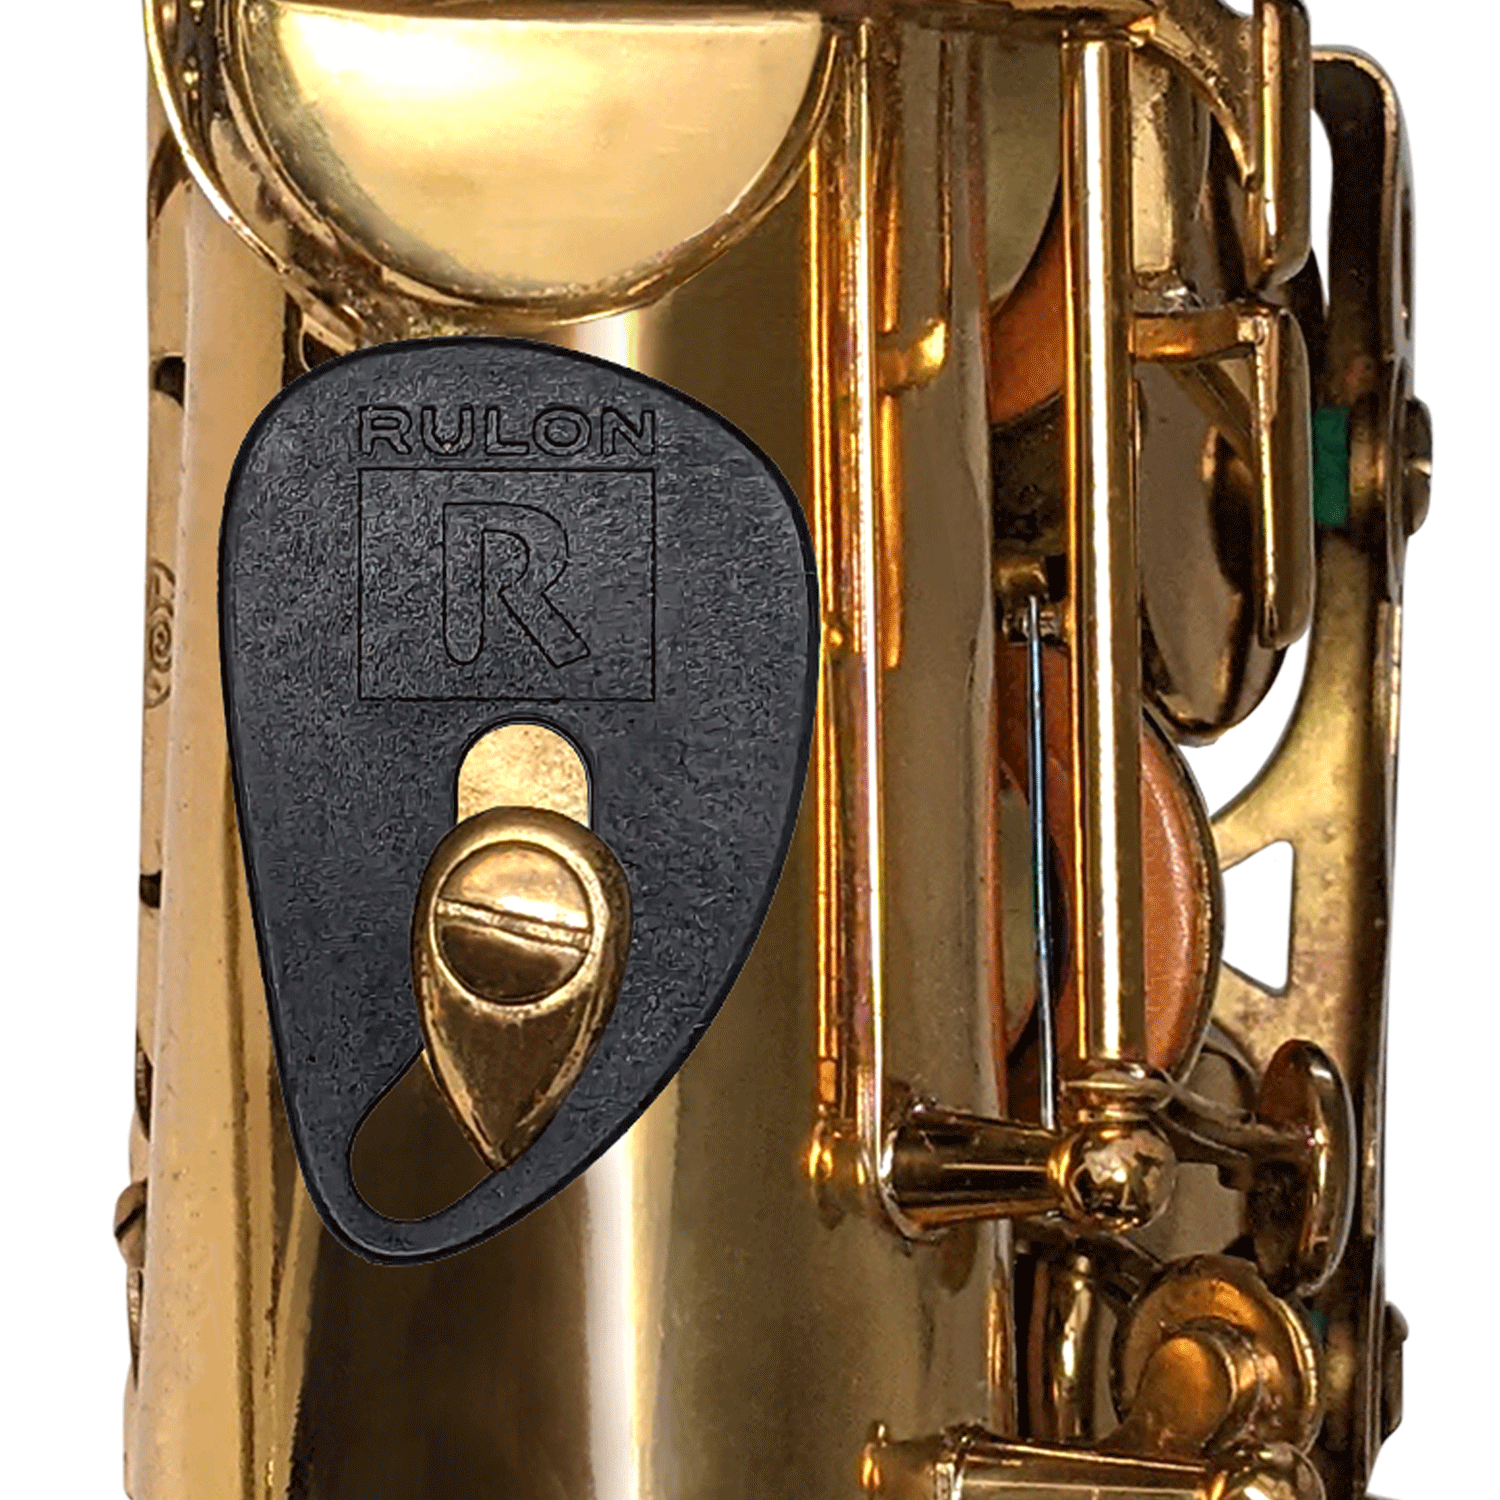 The RULON saxophone thumb rest replaces the right thumb hook of the saxophone. The RULON sax rest is ergonomic to adjust for any hand size or grip shape. It helps remove pain and thumb discomfort while playing.